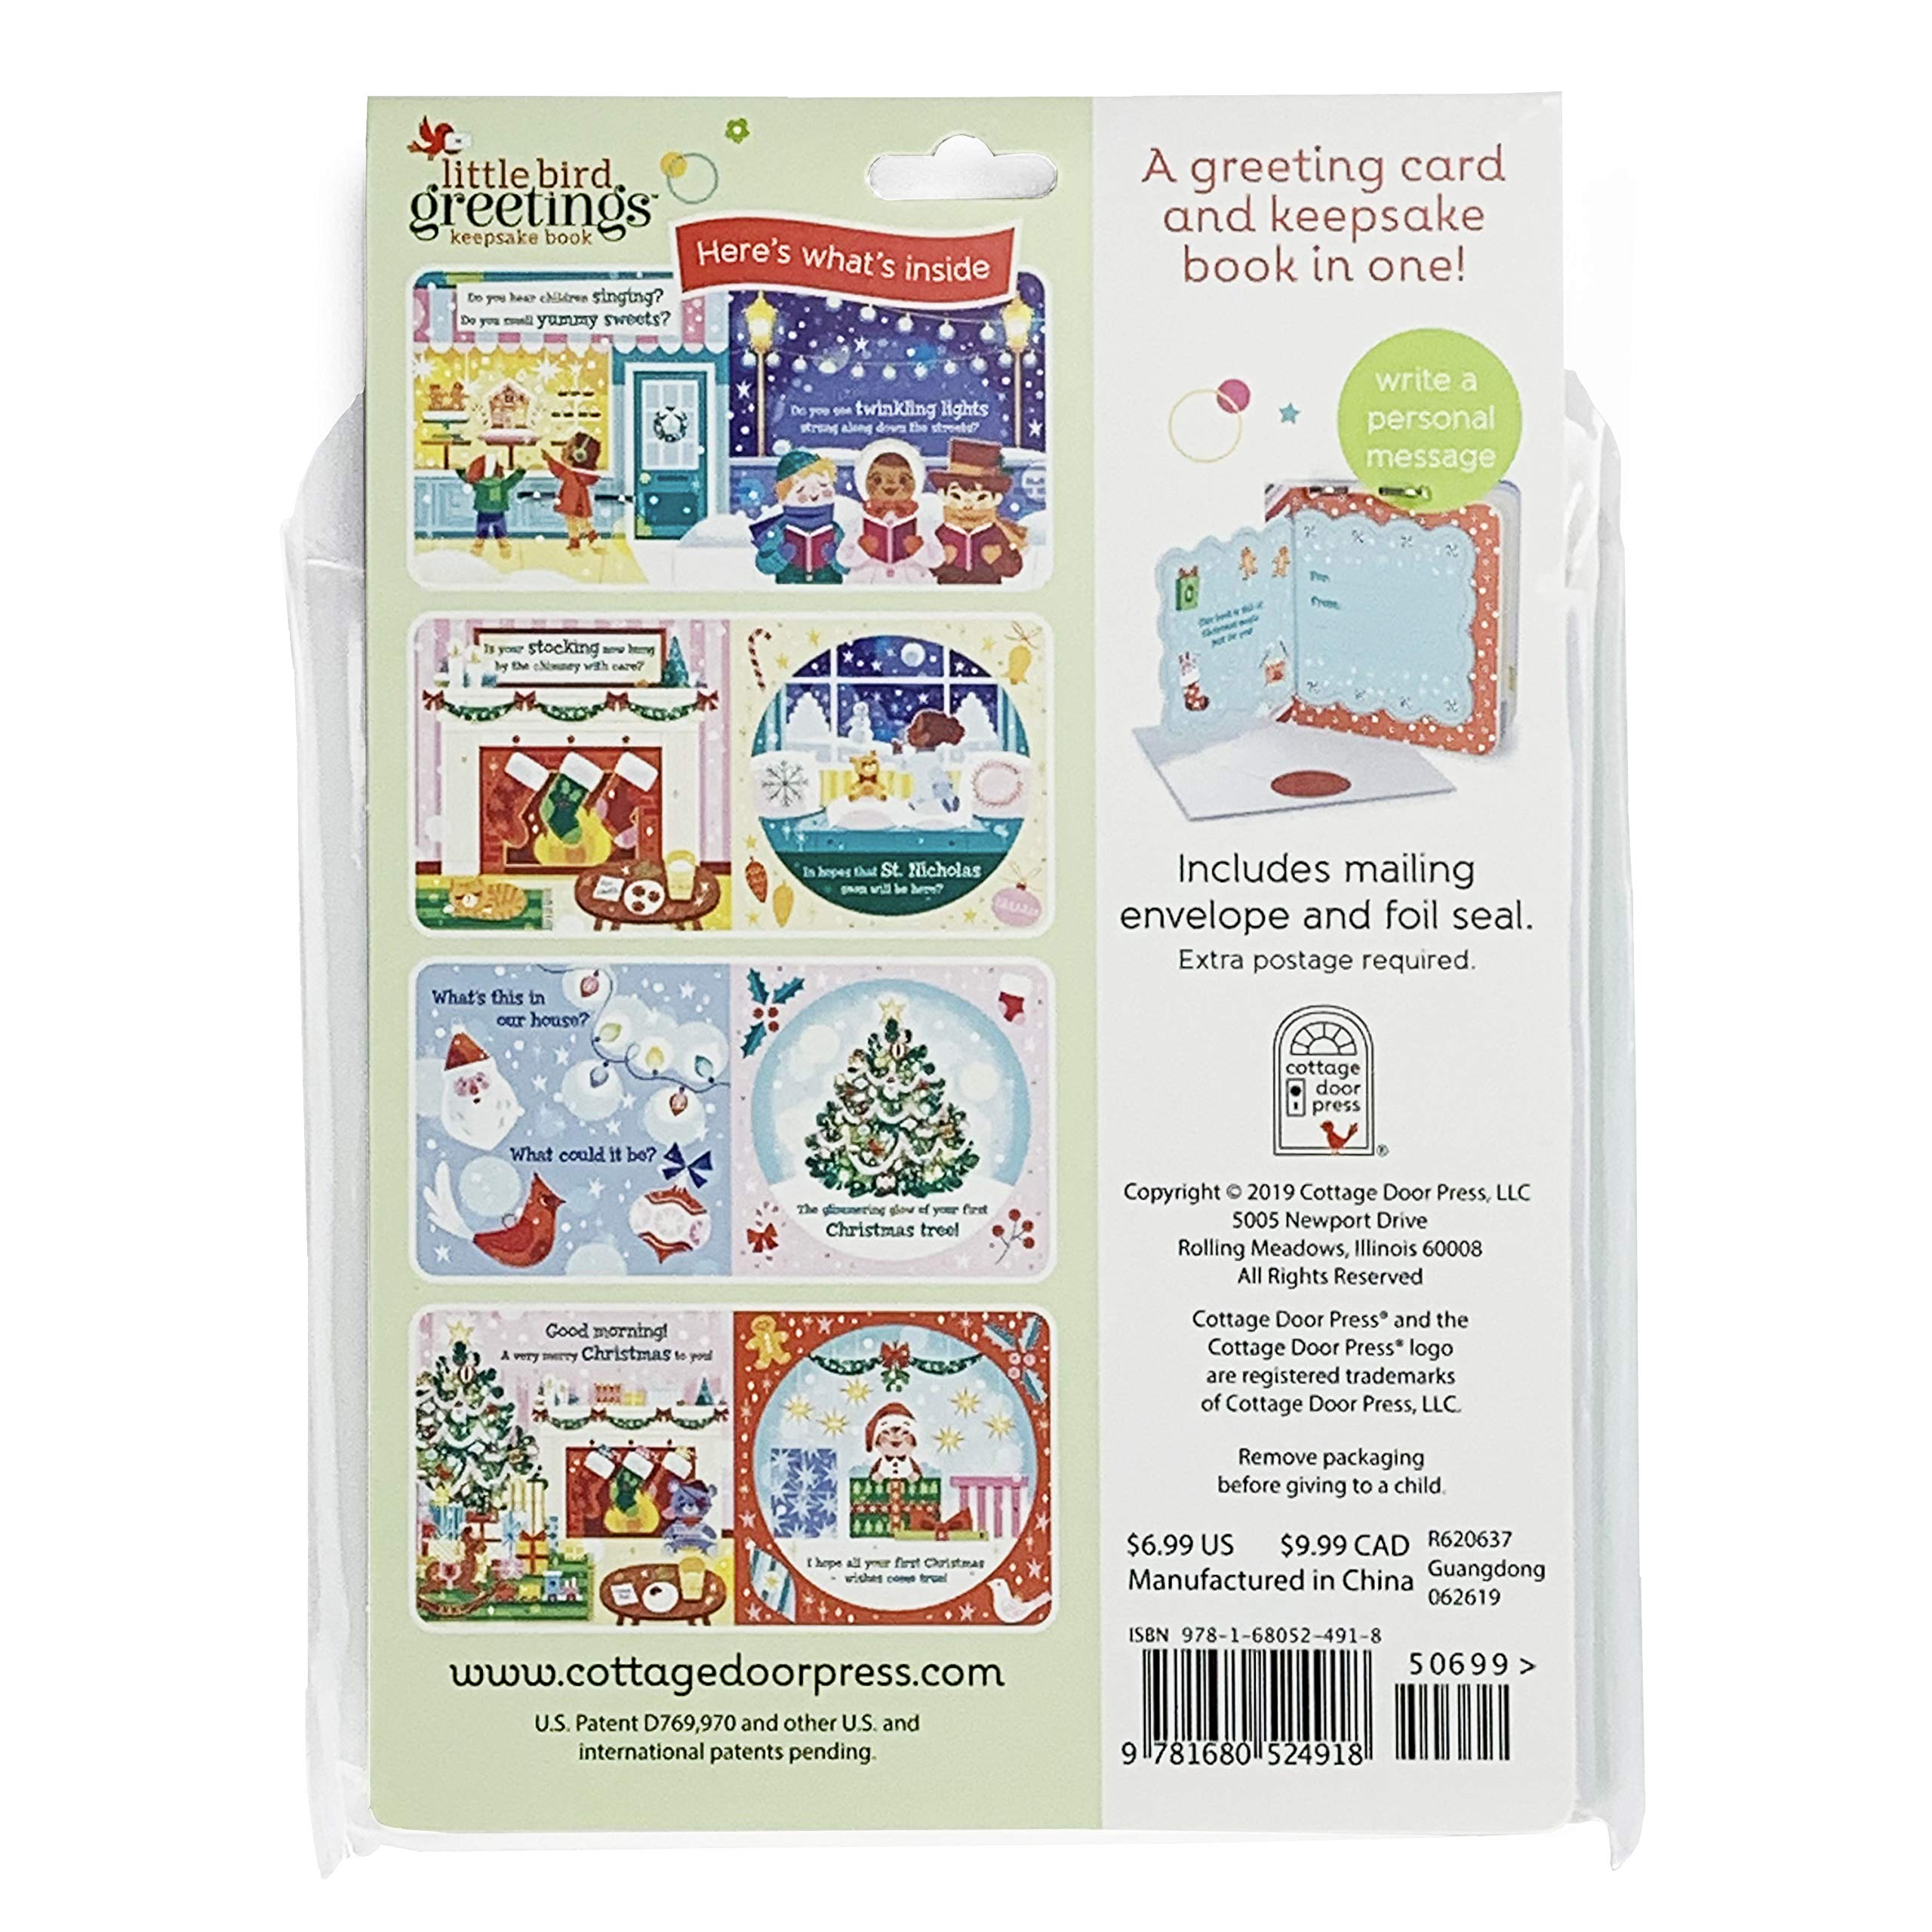 Baby's First Christmas Greeting Card Board Book (Includes Envelope and Foil Sticker) For Newborns, 0-12 Months (Little Bird Greetings Keepsake Book)